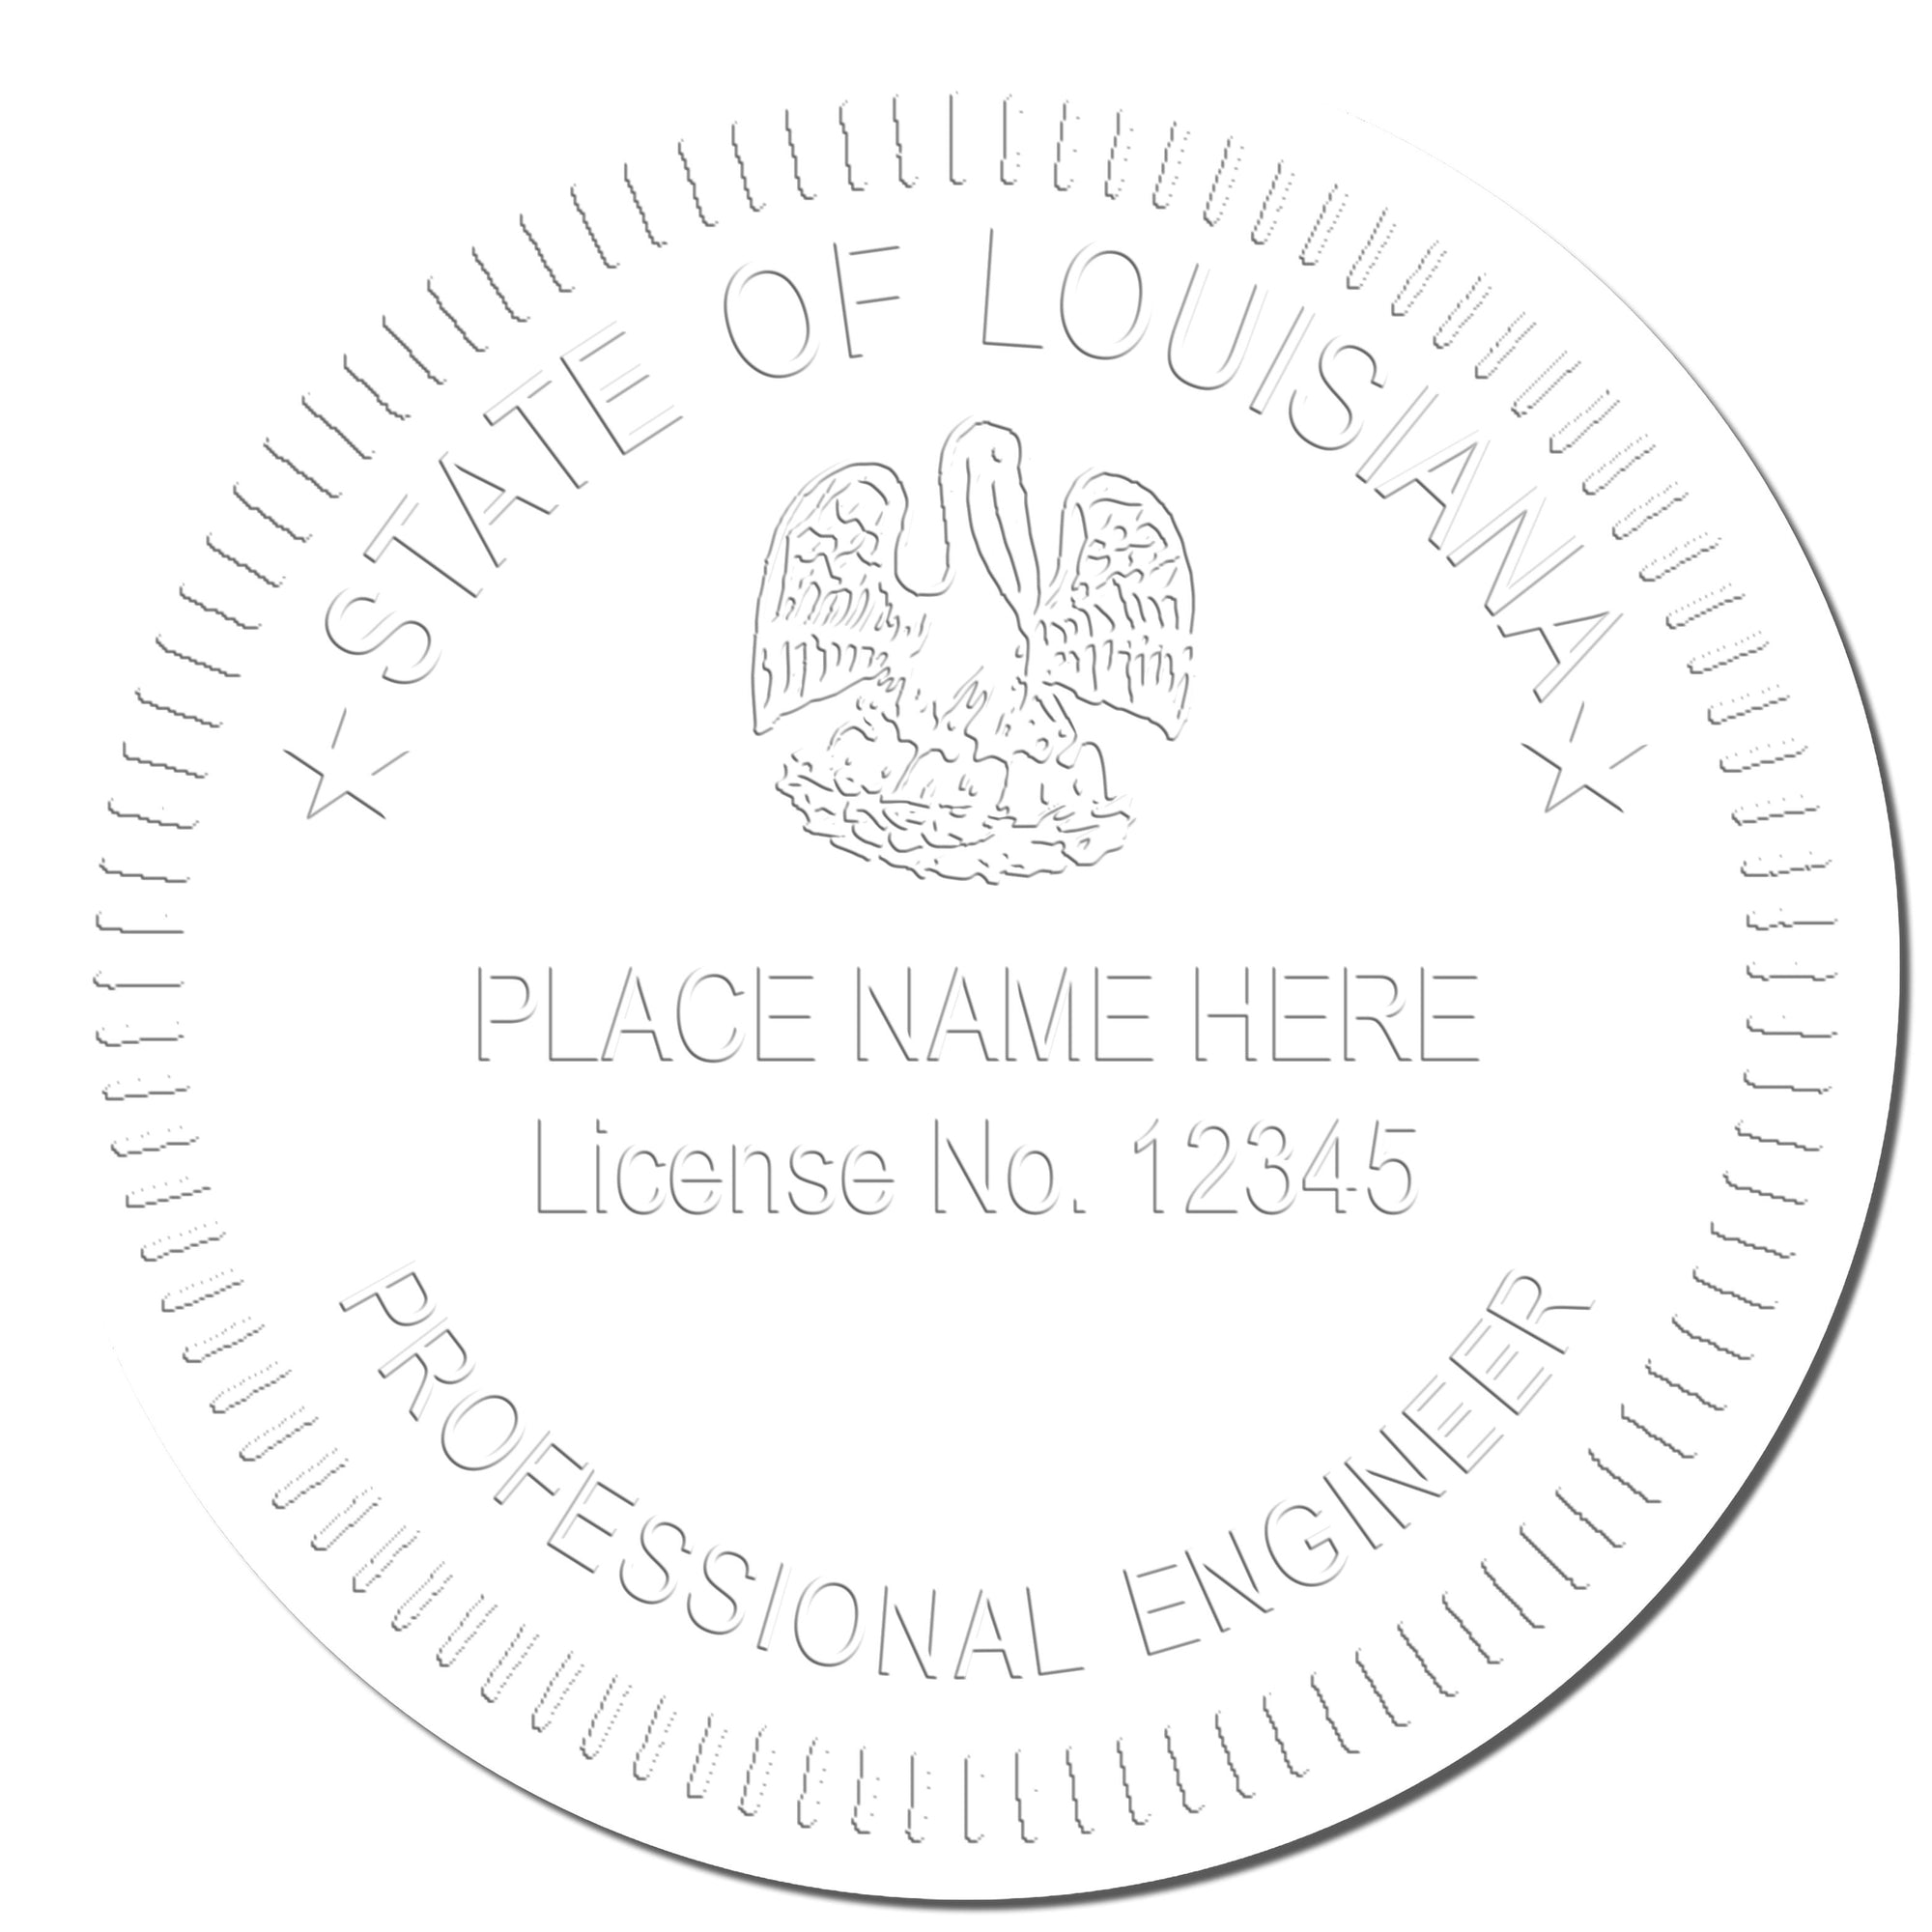 The main image for the Louisiana Engineer Desk Seal depicting a sample of the imprint and electronic files